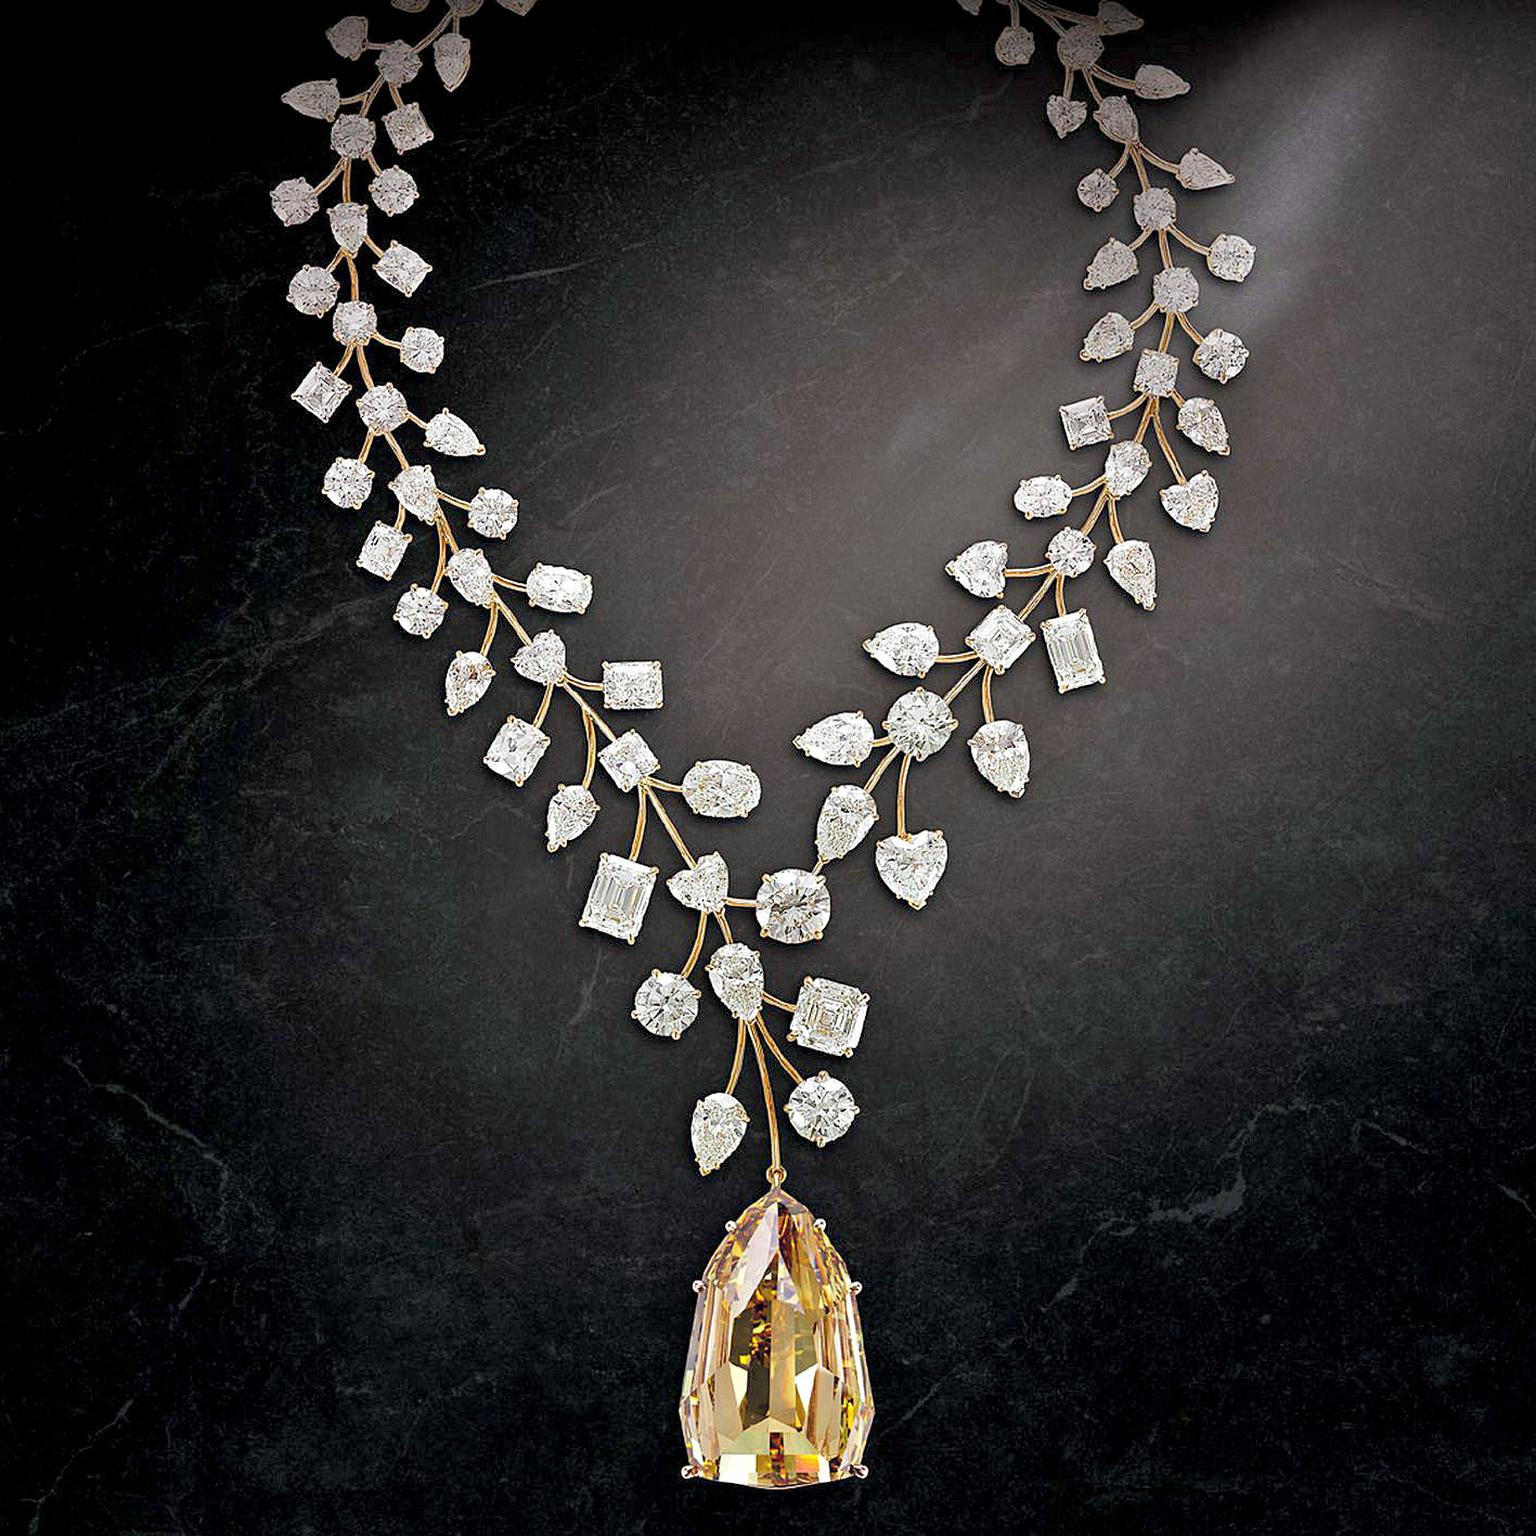 This may be one of the most expensive necklaces in the world